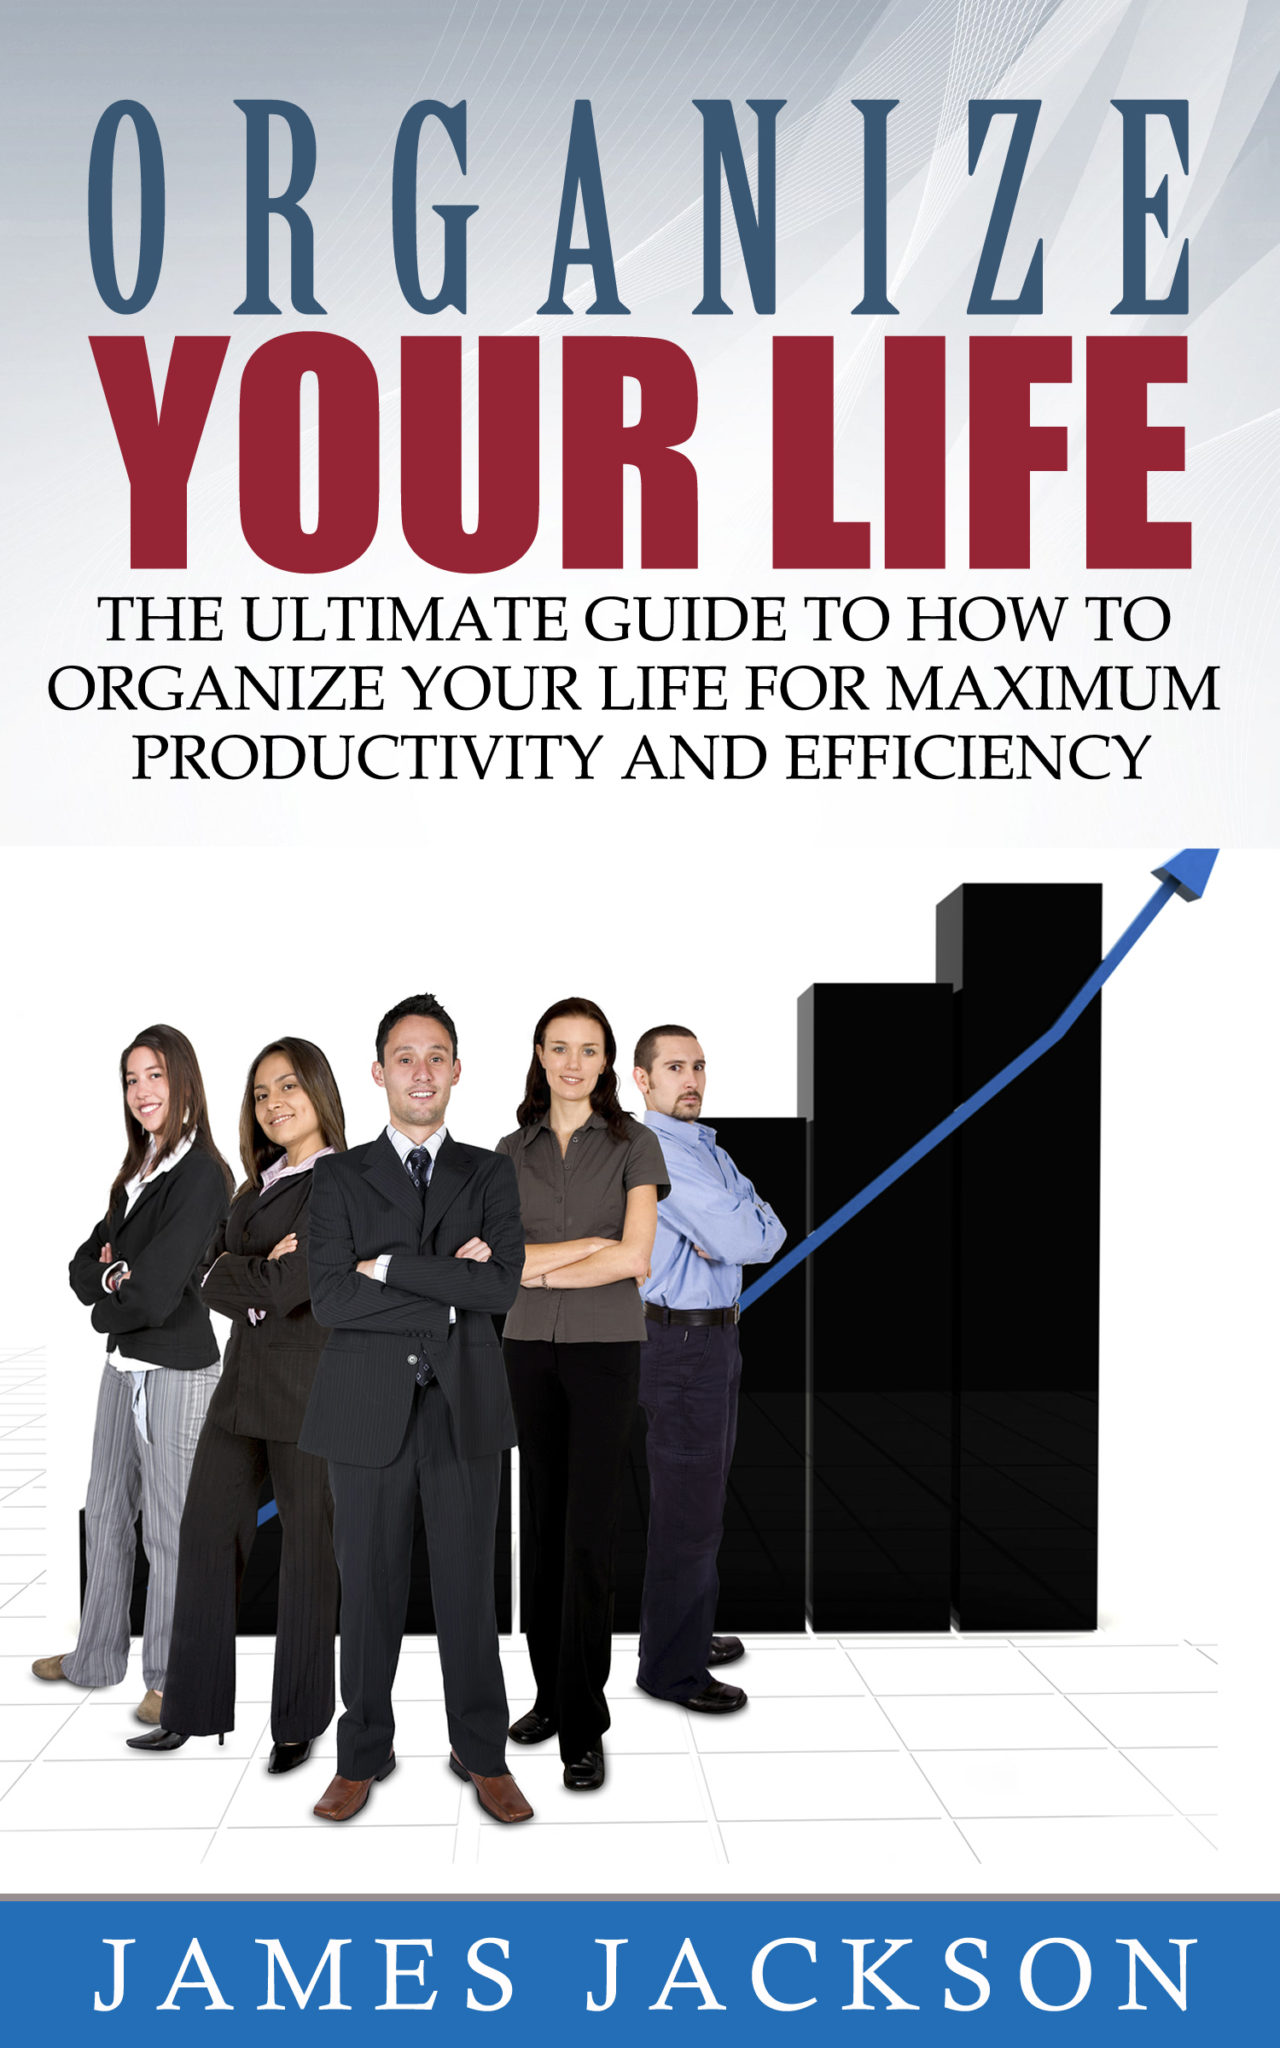 Organize Your Life: The Ultimate Guide to How to Organize Your Life for Maximum Productivity and Efficiency by James Jackson